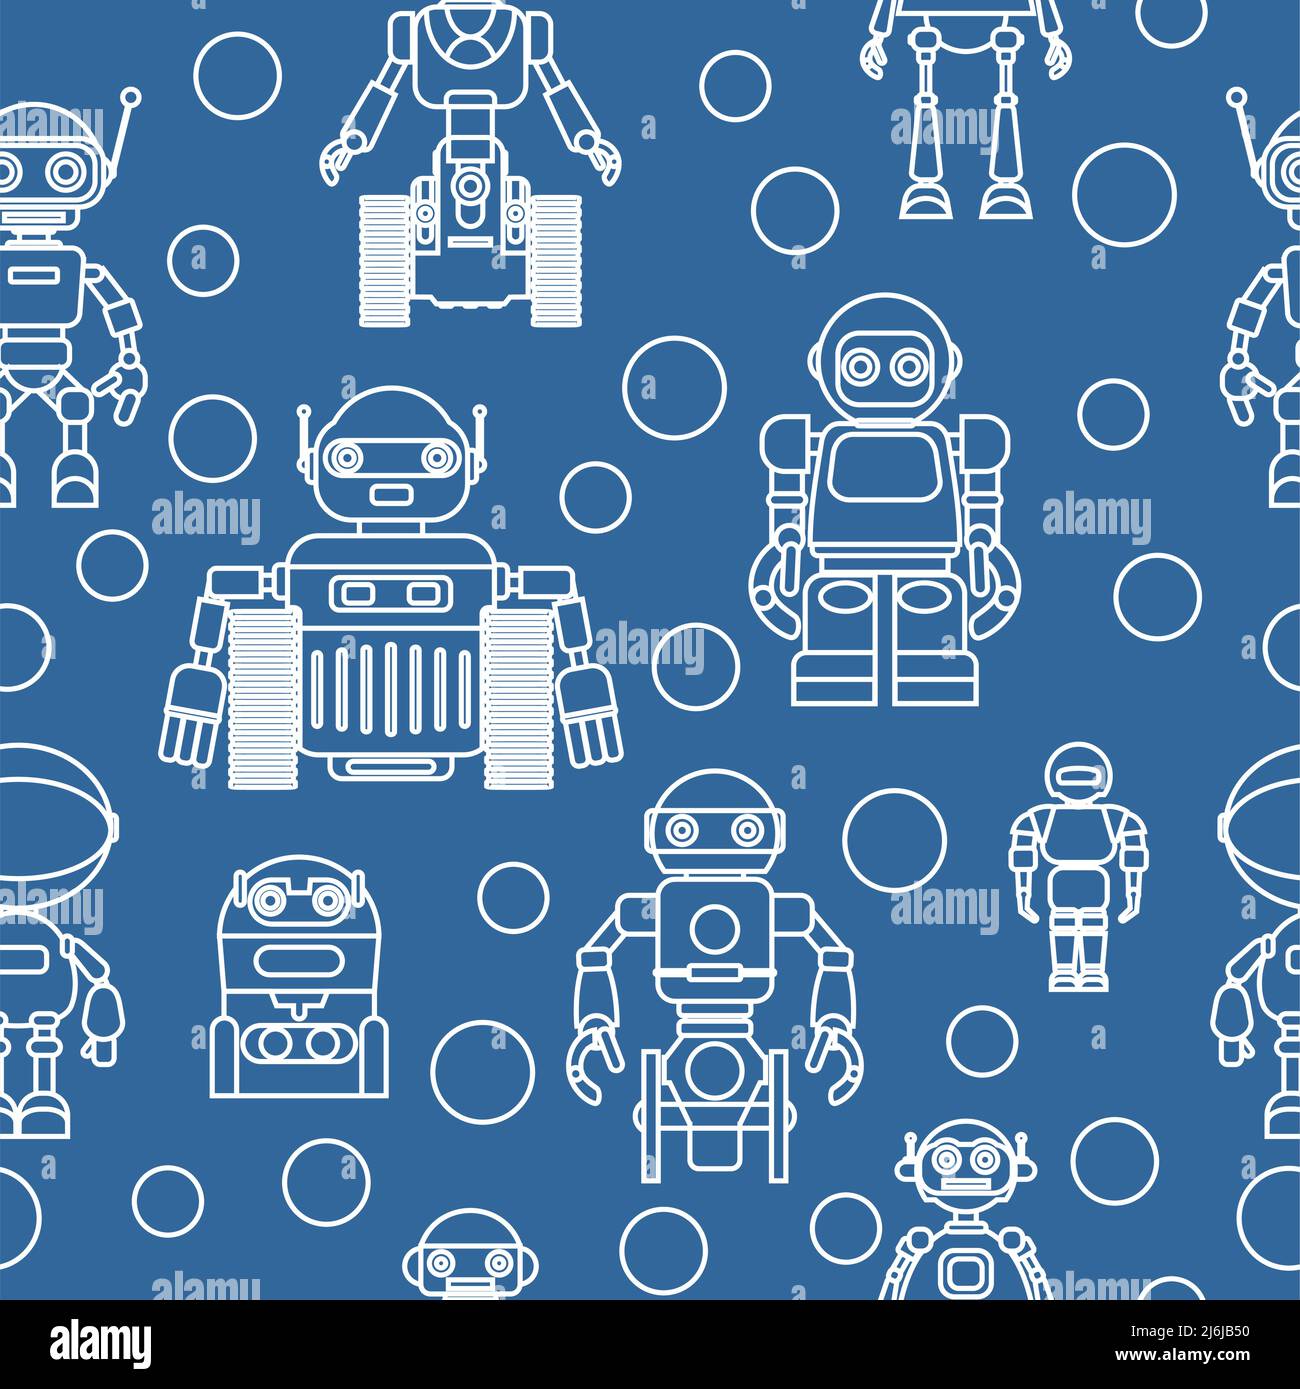 Pattern with various kinds of detailed robots isolated on blue background. Stock Vector